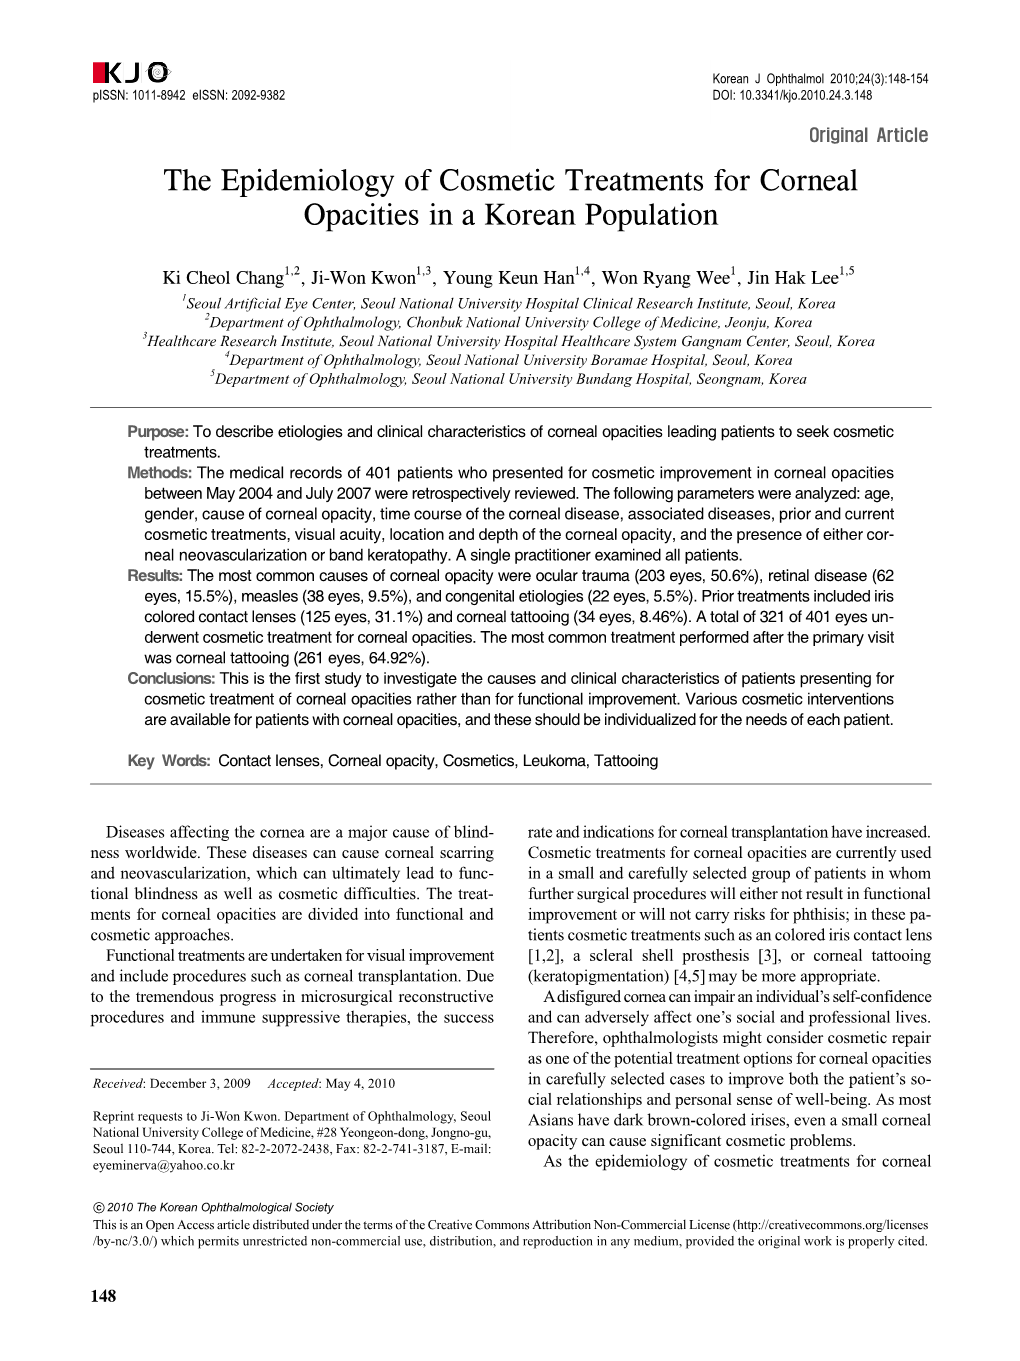 The Epidemiology of Cosmetic Treatments for Corneal Opacities in a Korean Population